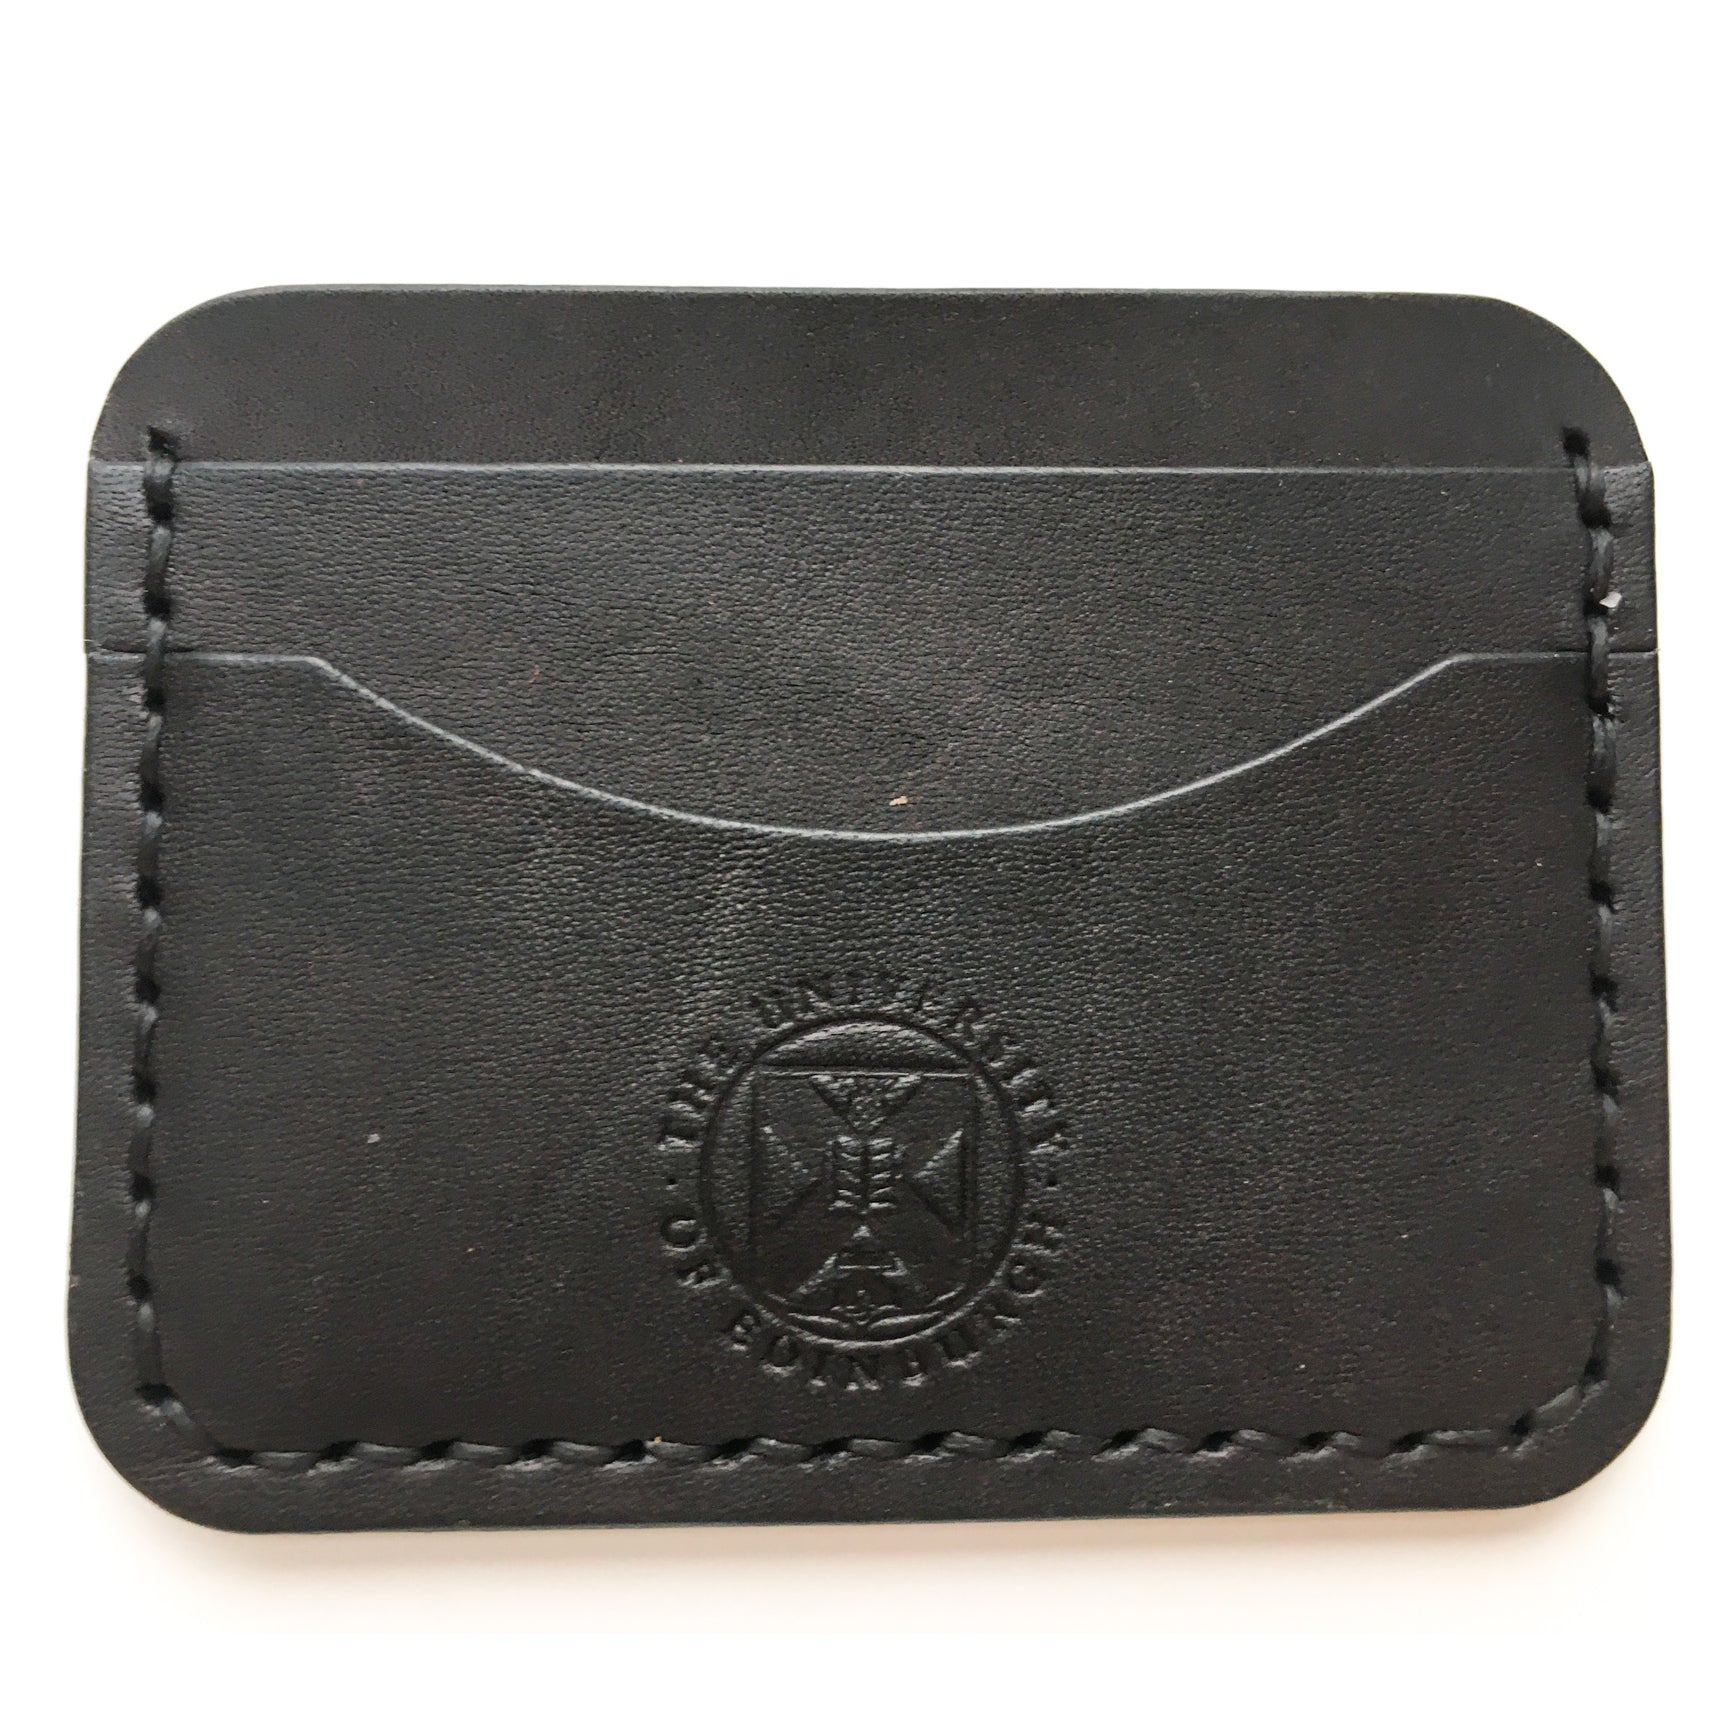 Close up of the black Leather Card Holder demonstrating the stitching detail and the embossed crest. 